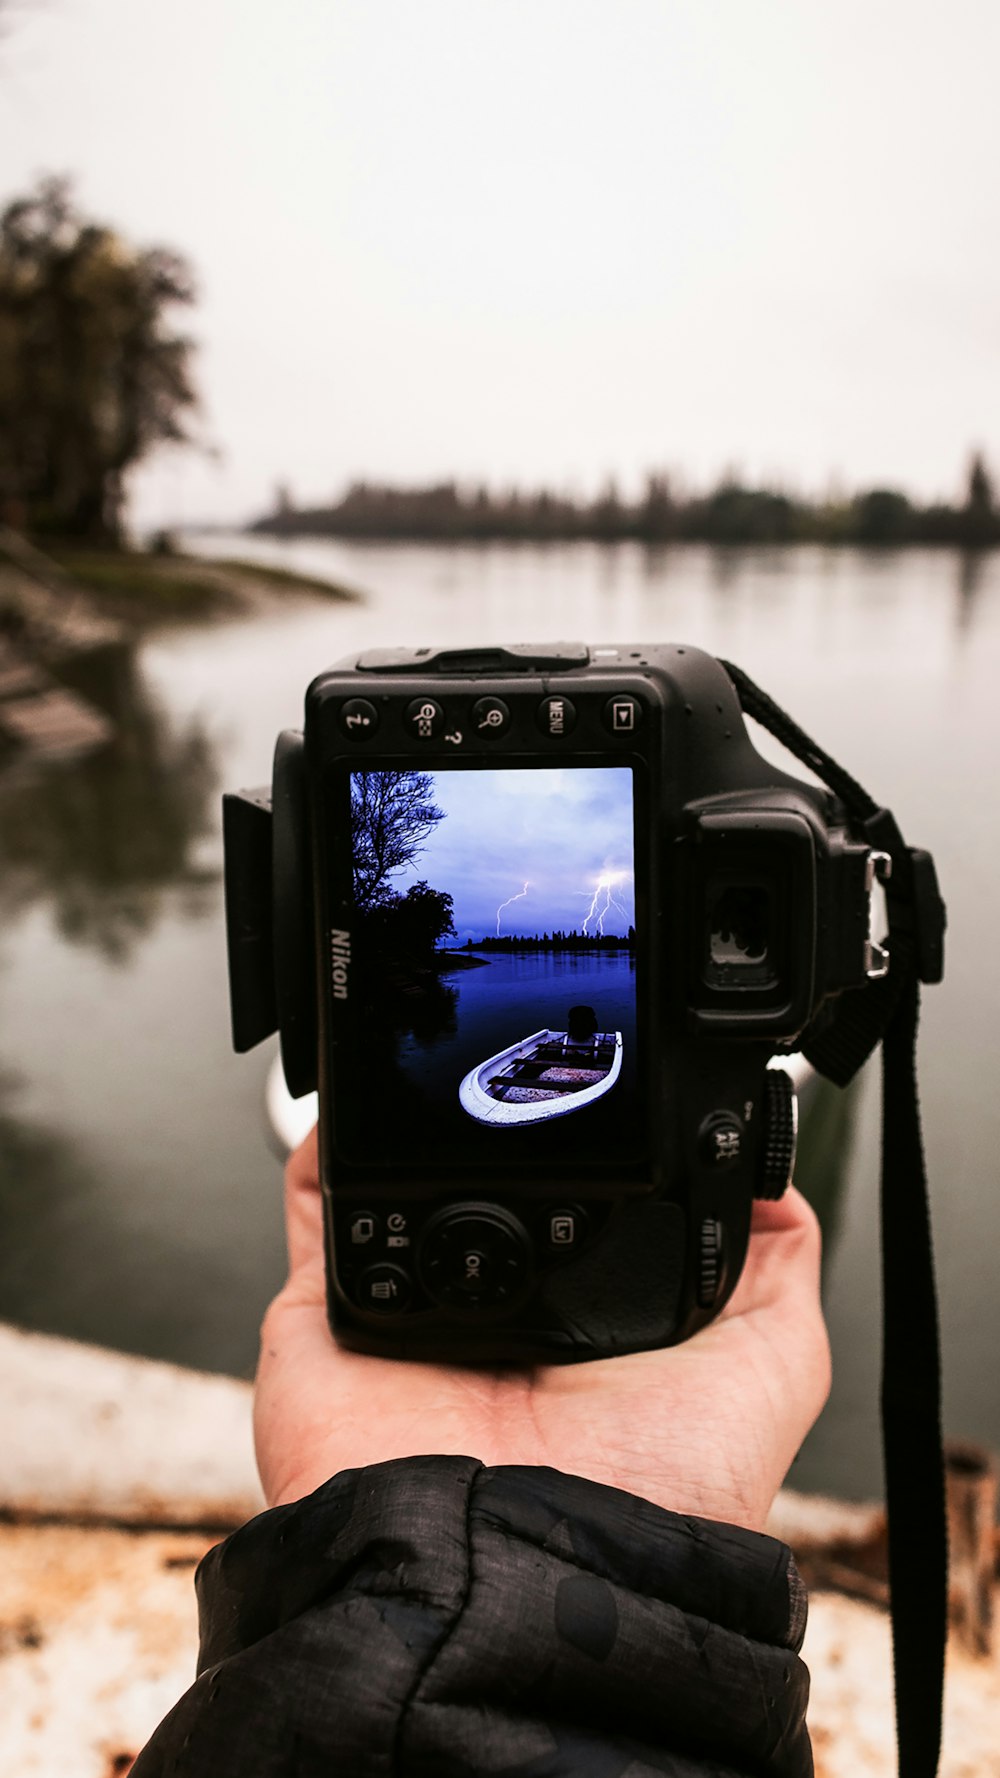 person holding black dslr camera taking photo of body of water during daytime